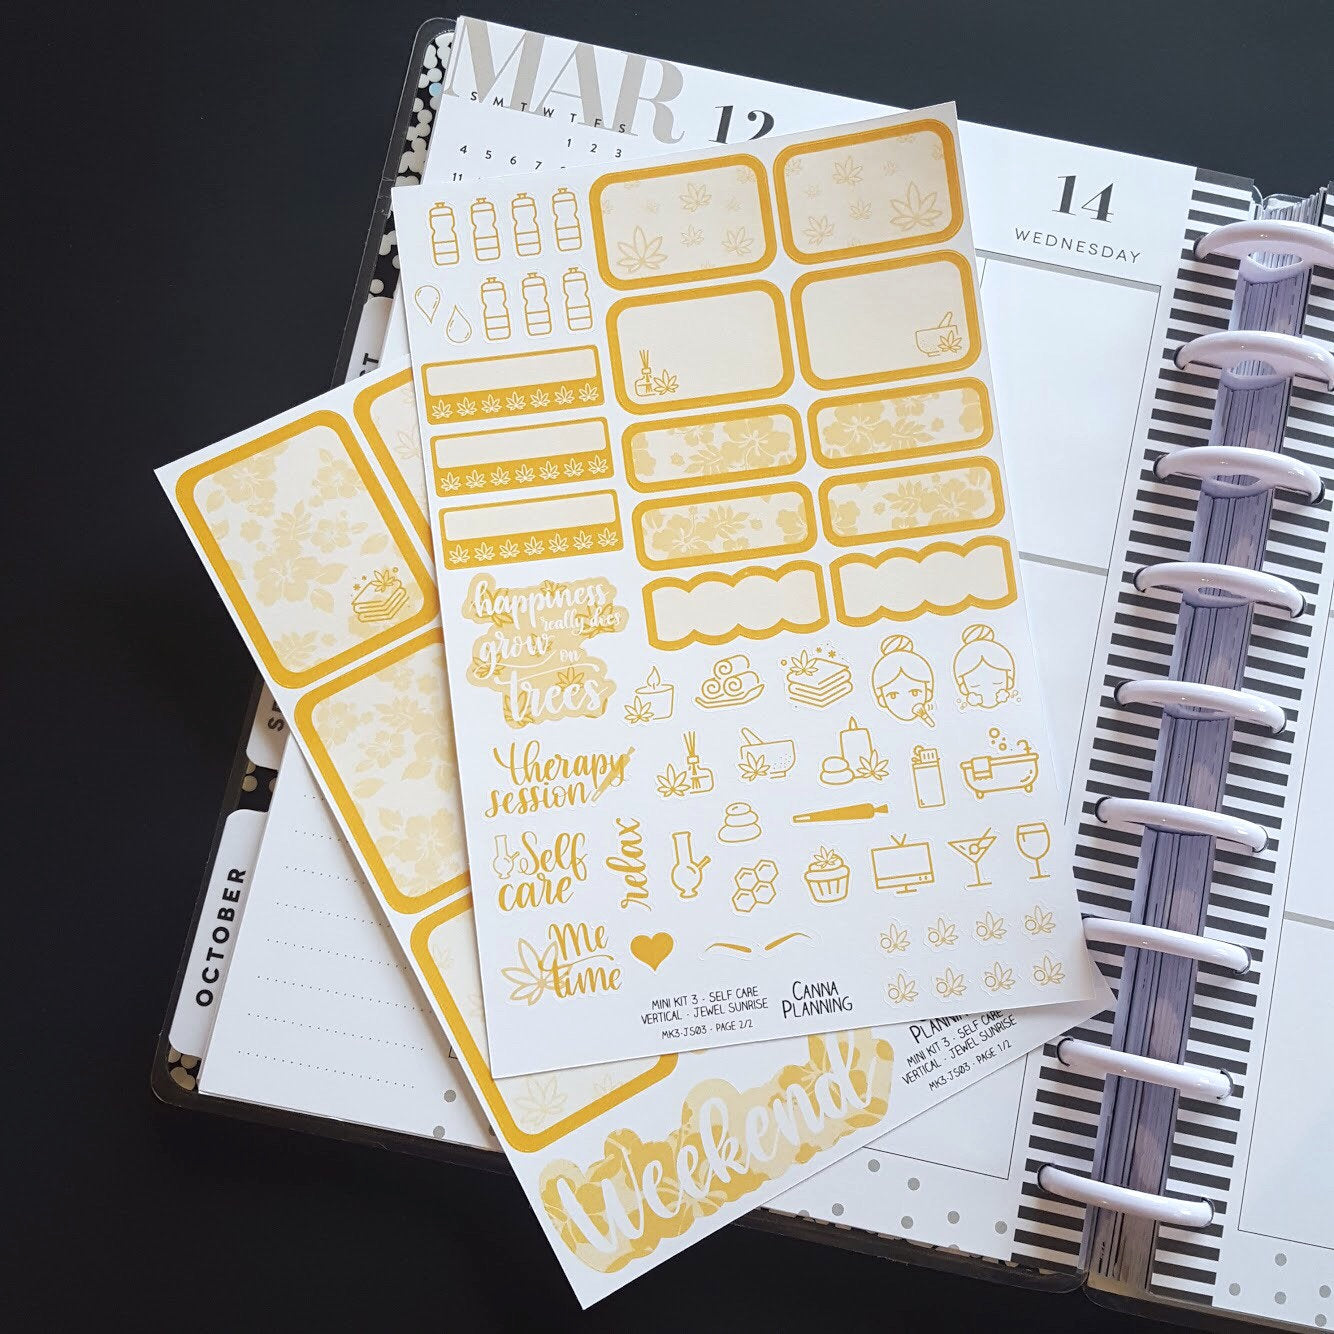 Me Time Weekly Vertical Kit - Planner Stickers